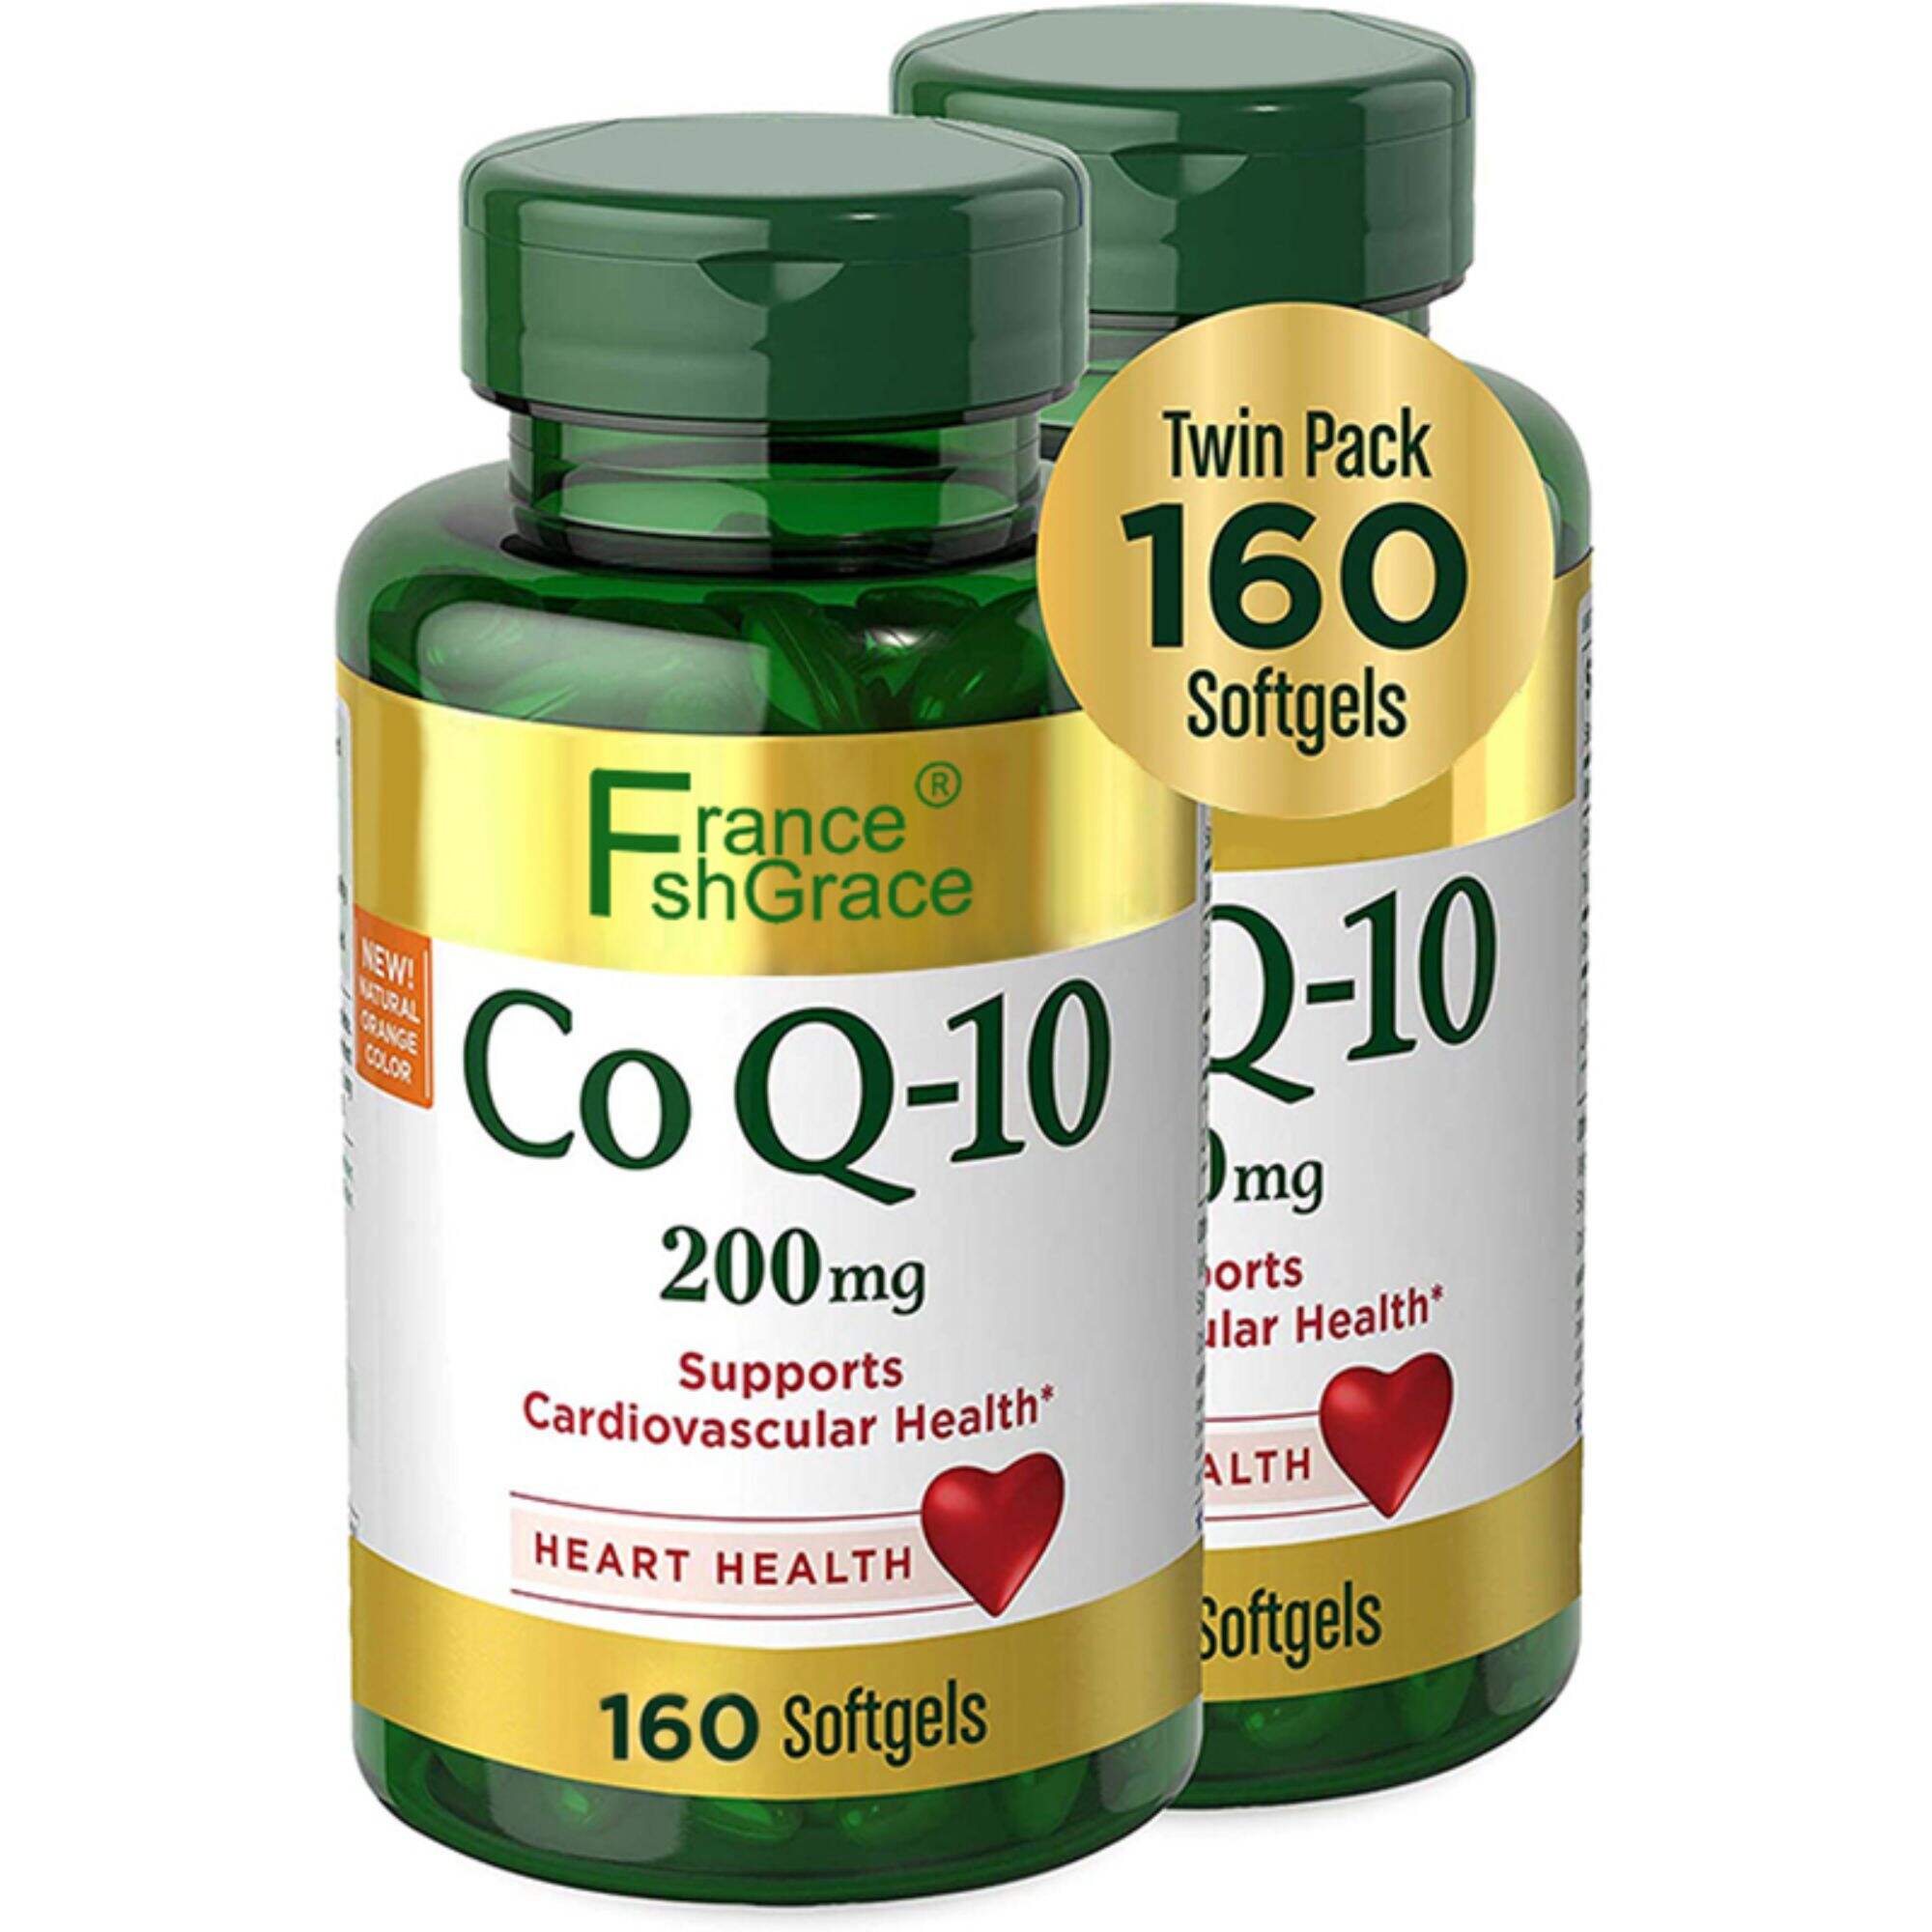 CoQ-10 Dietary Supplement, Supports Cardiovascular and Heart Health, 200mg Twin Pack